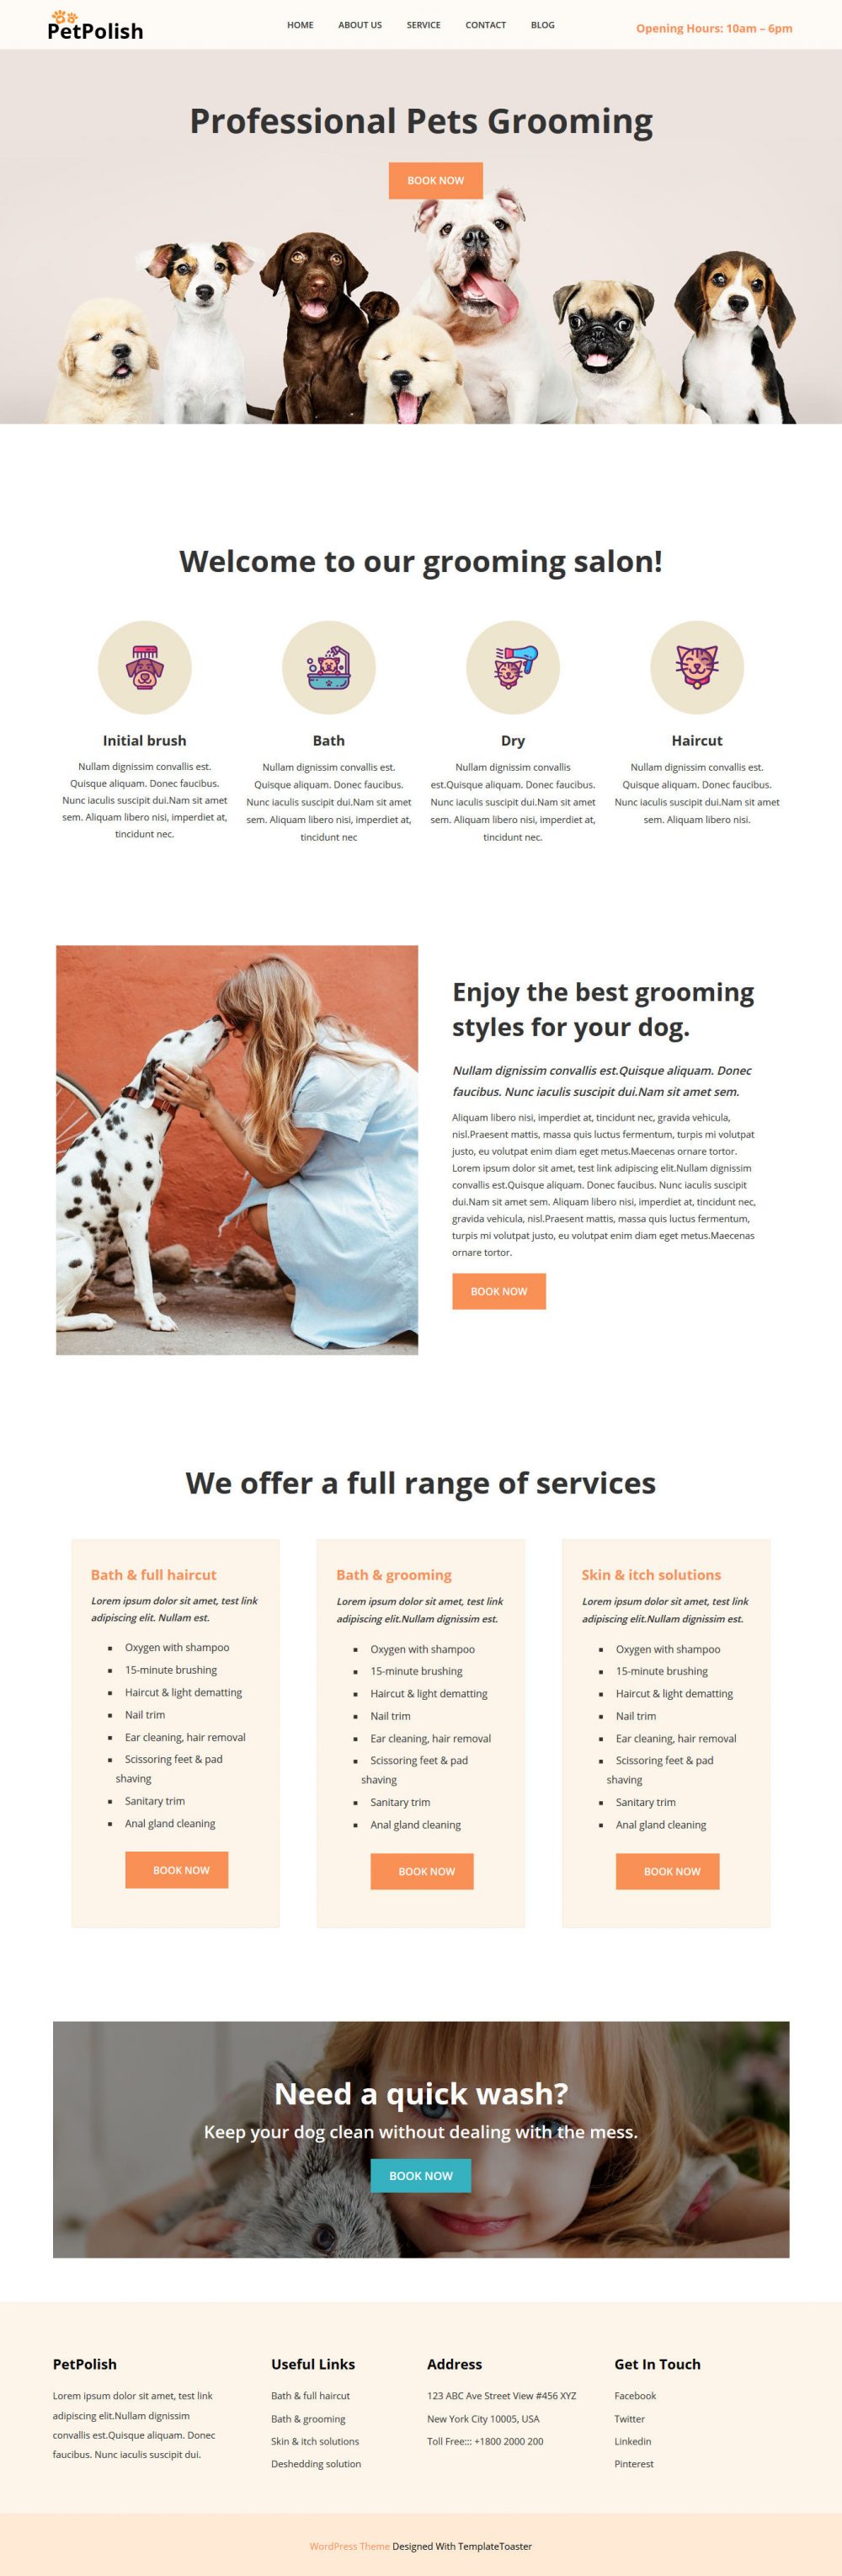 petpolish pet cleaning and care services wordpress theme